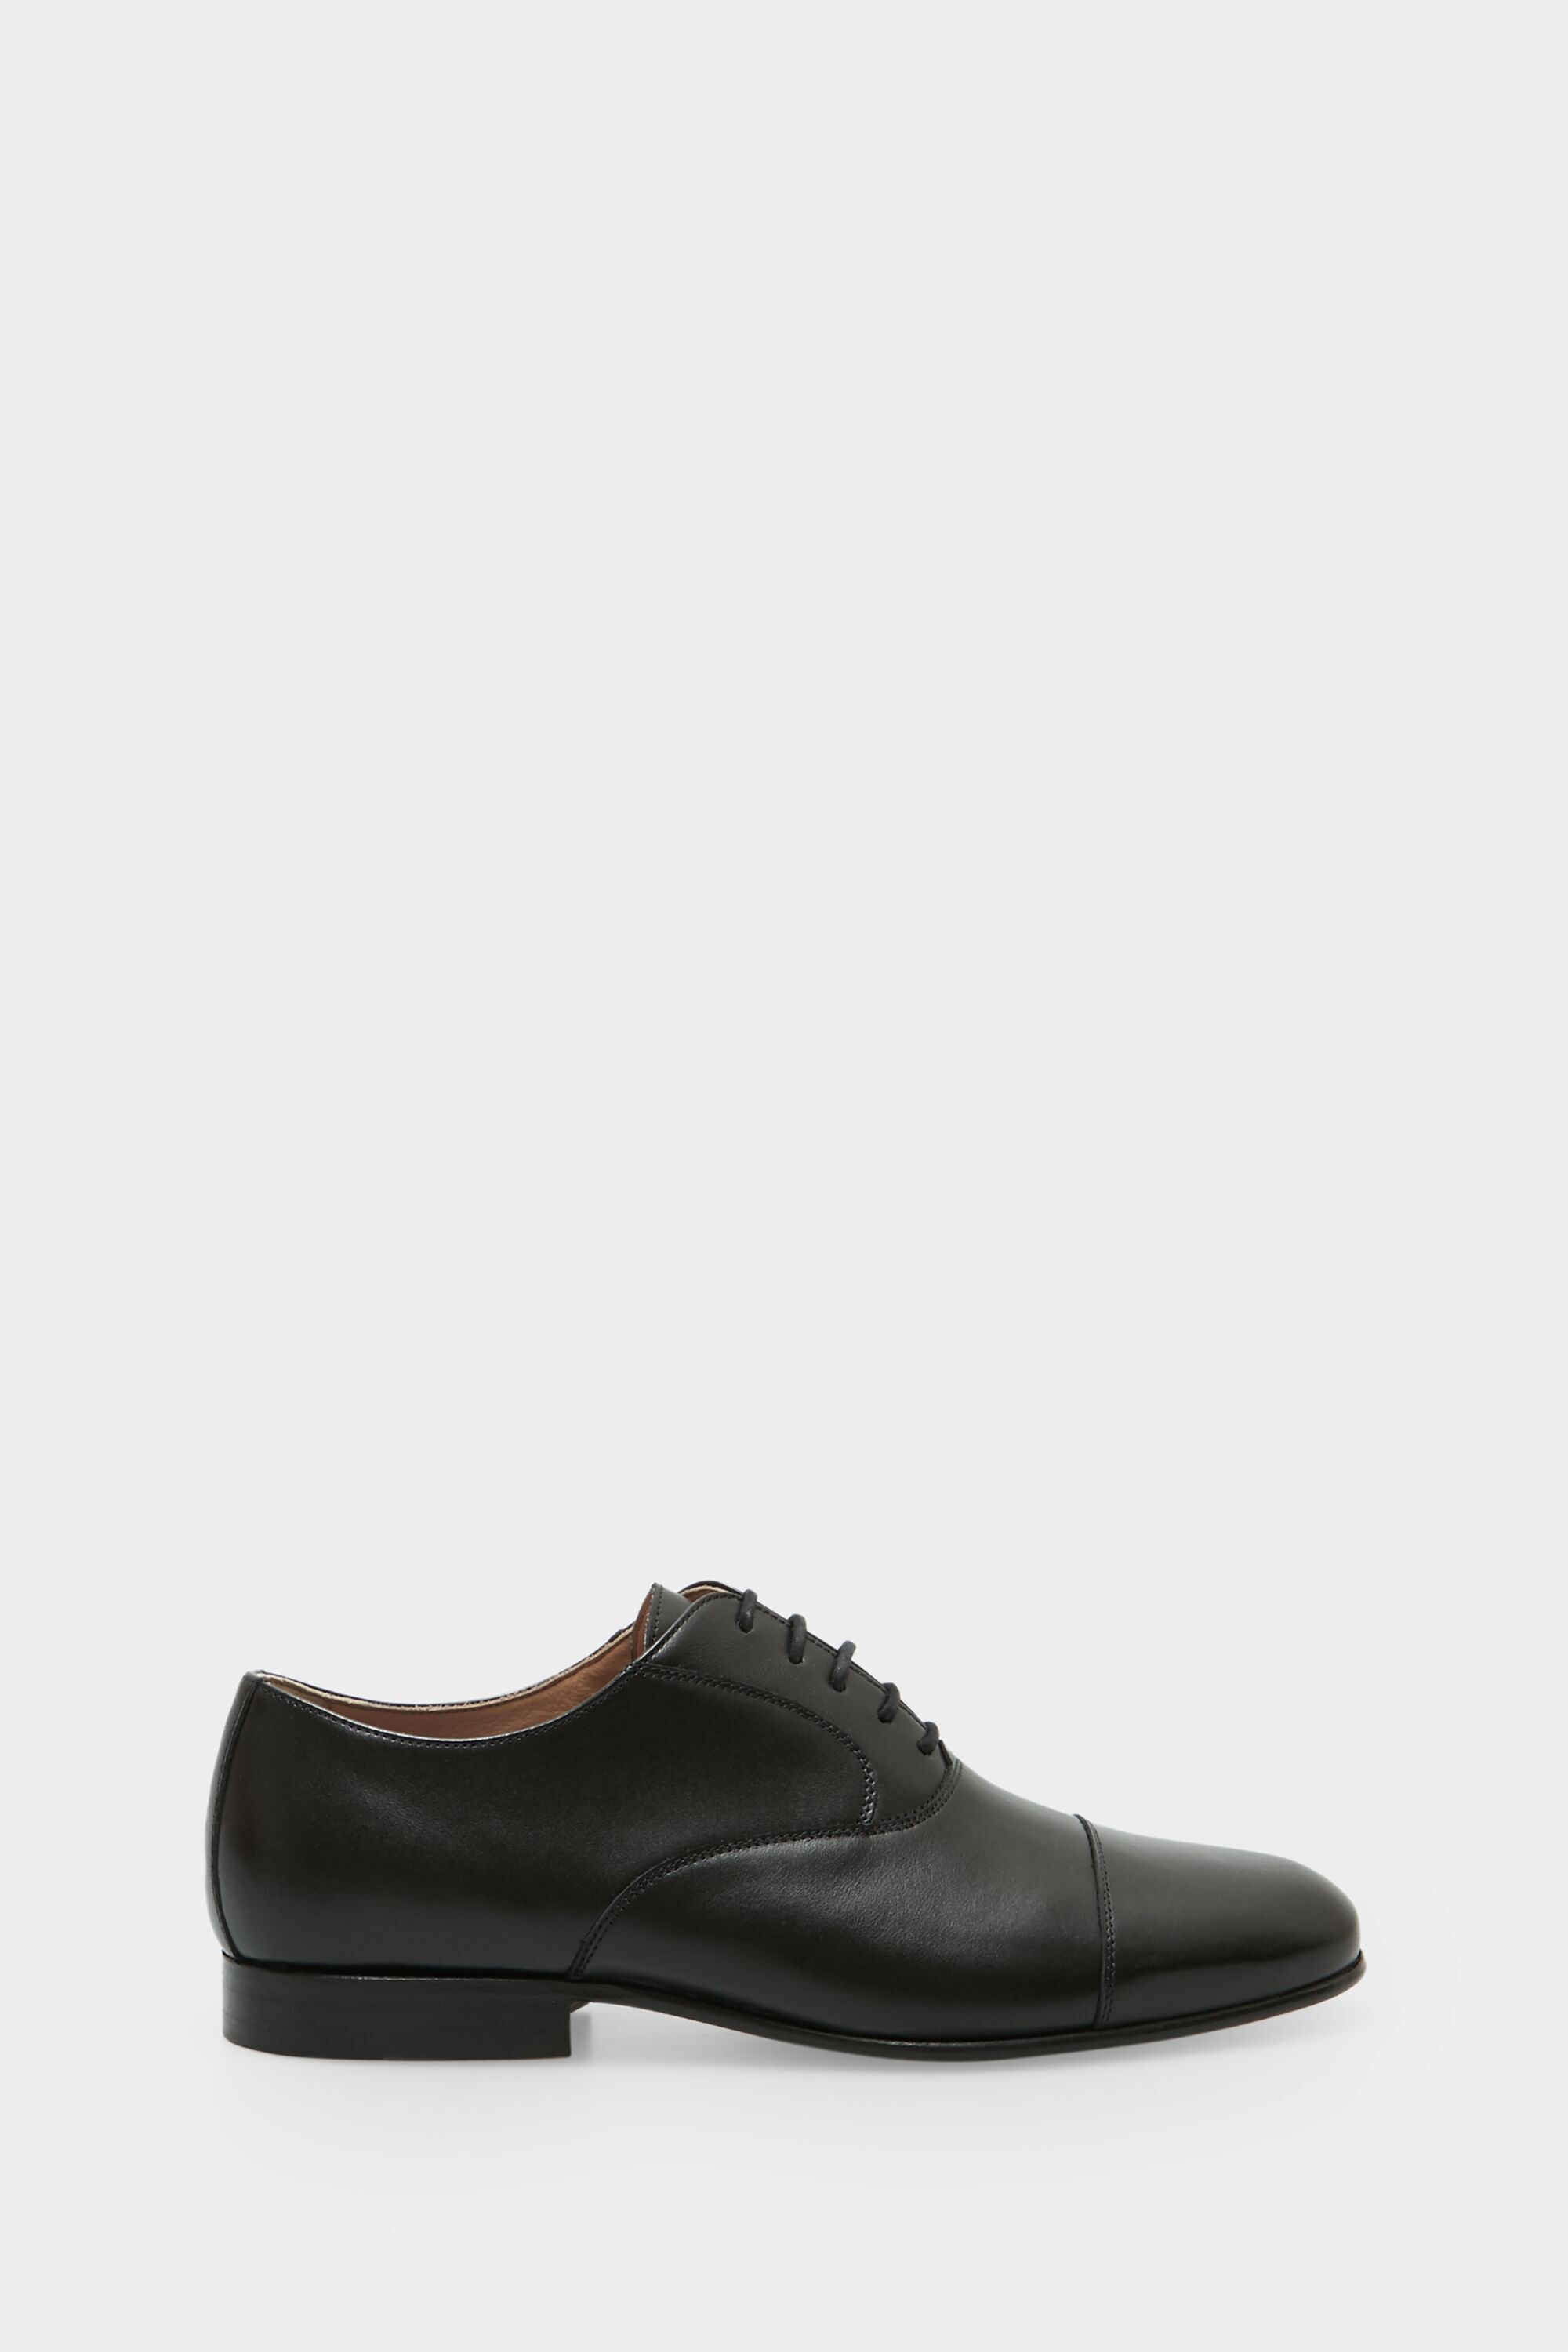 Classic Oxford shoes